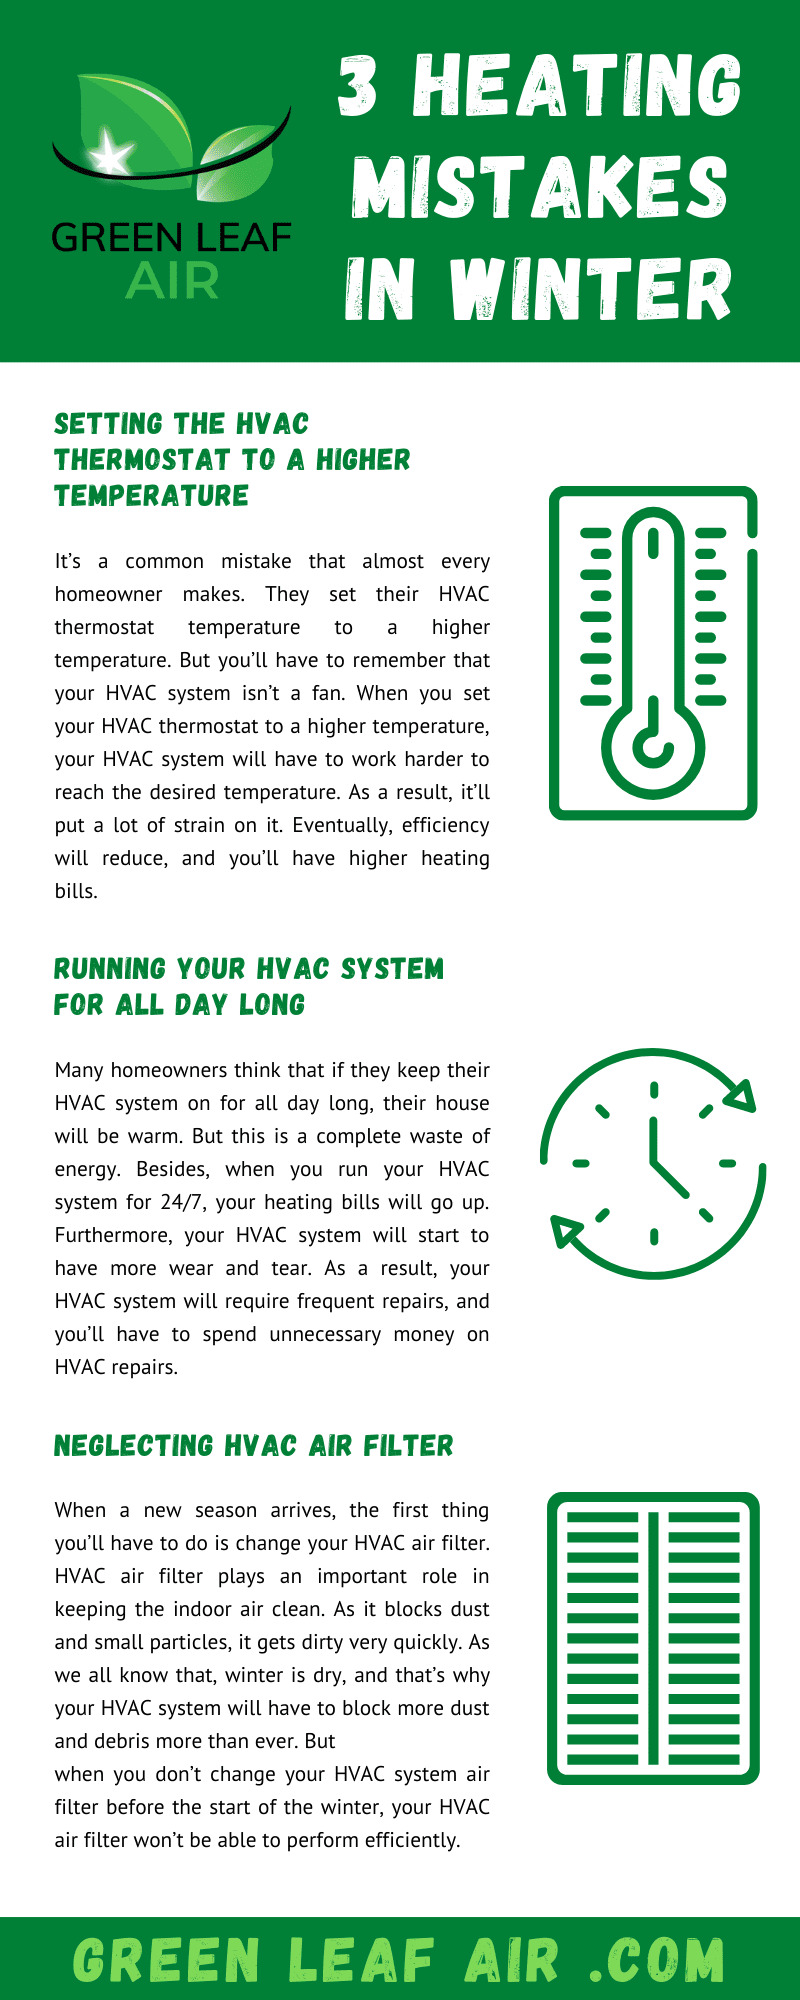 3 Heating Mistakes in Winter